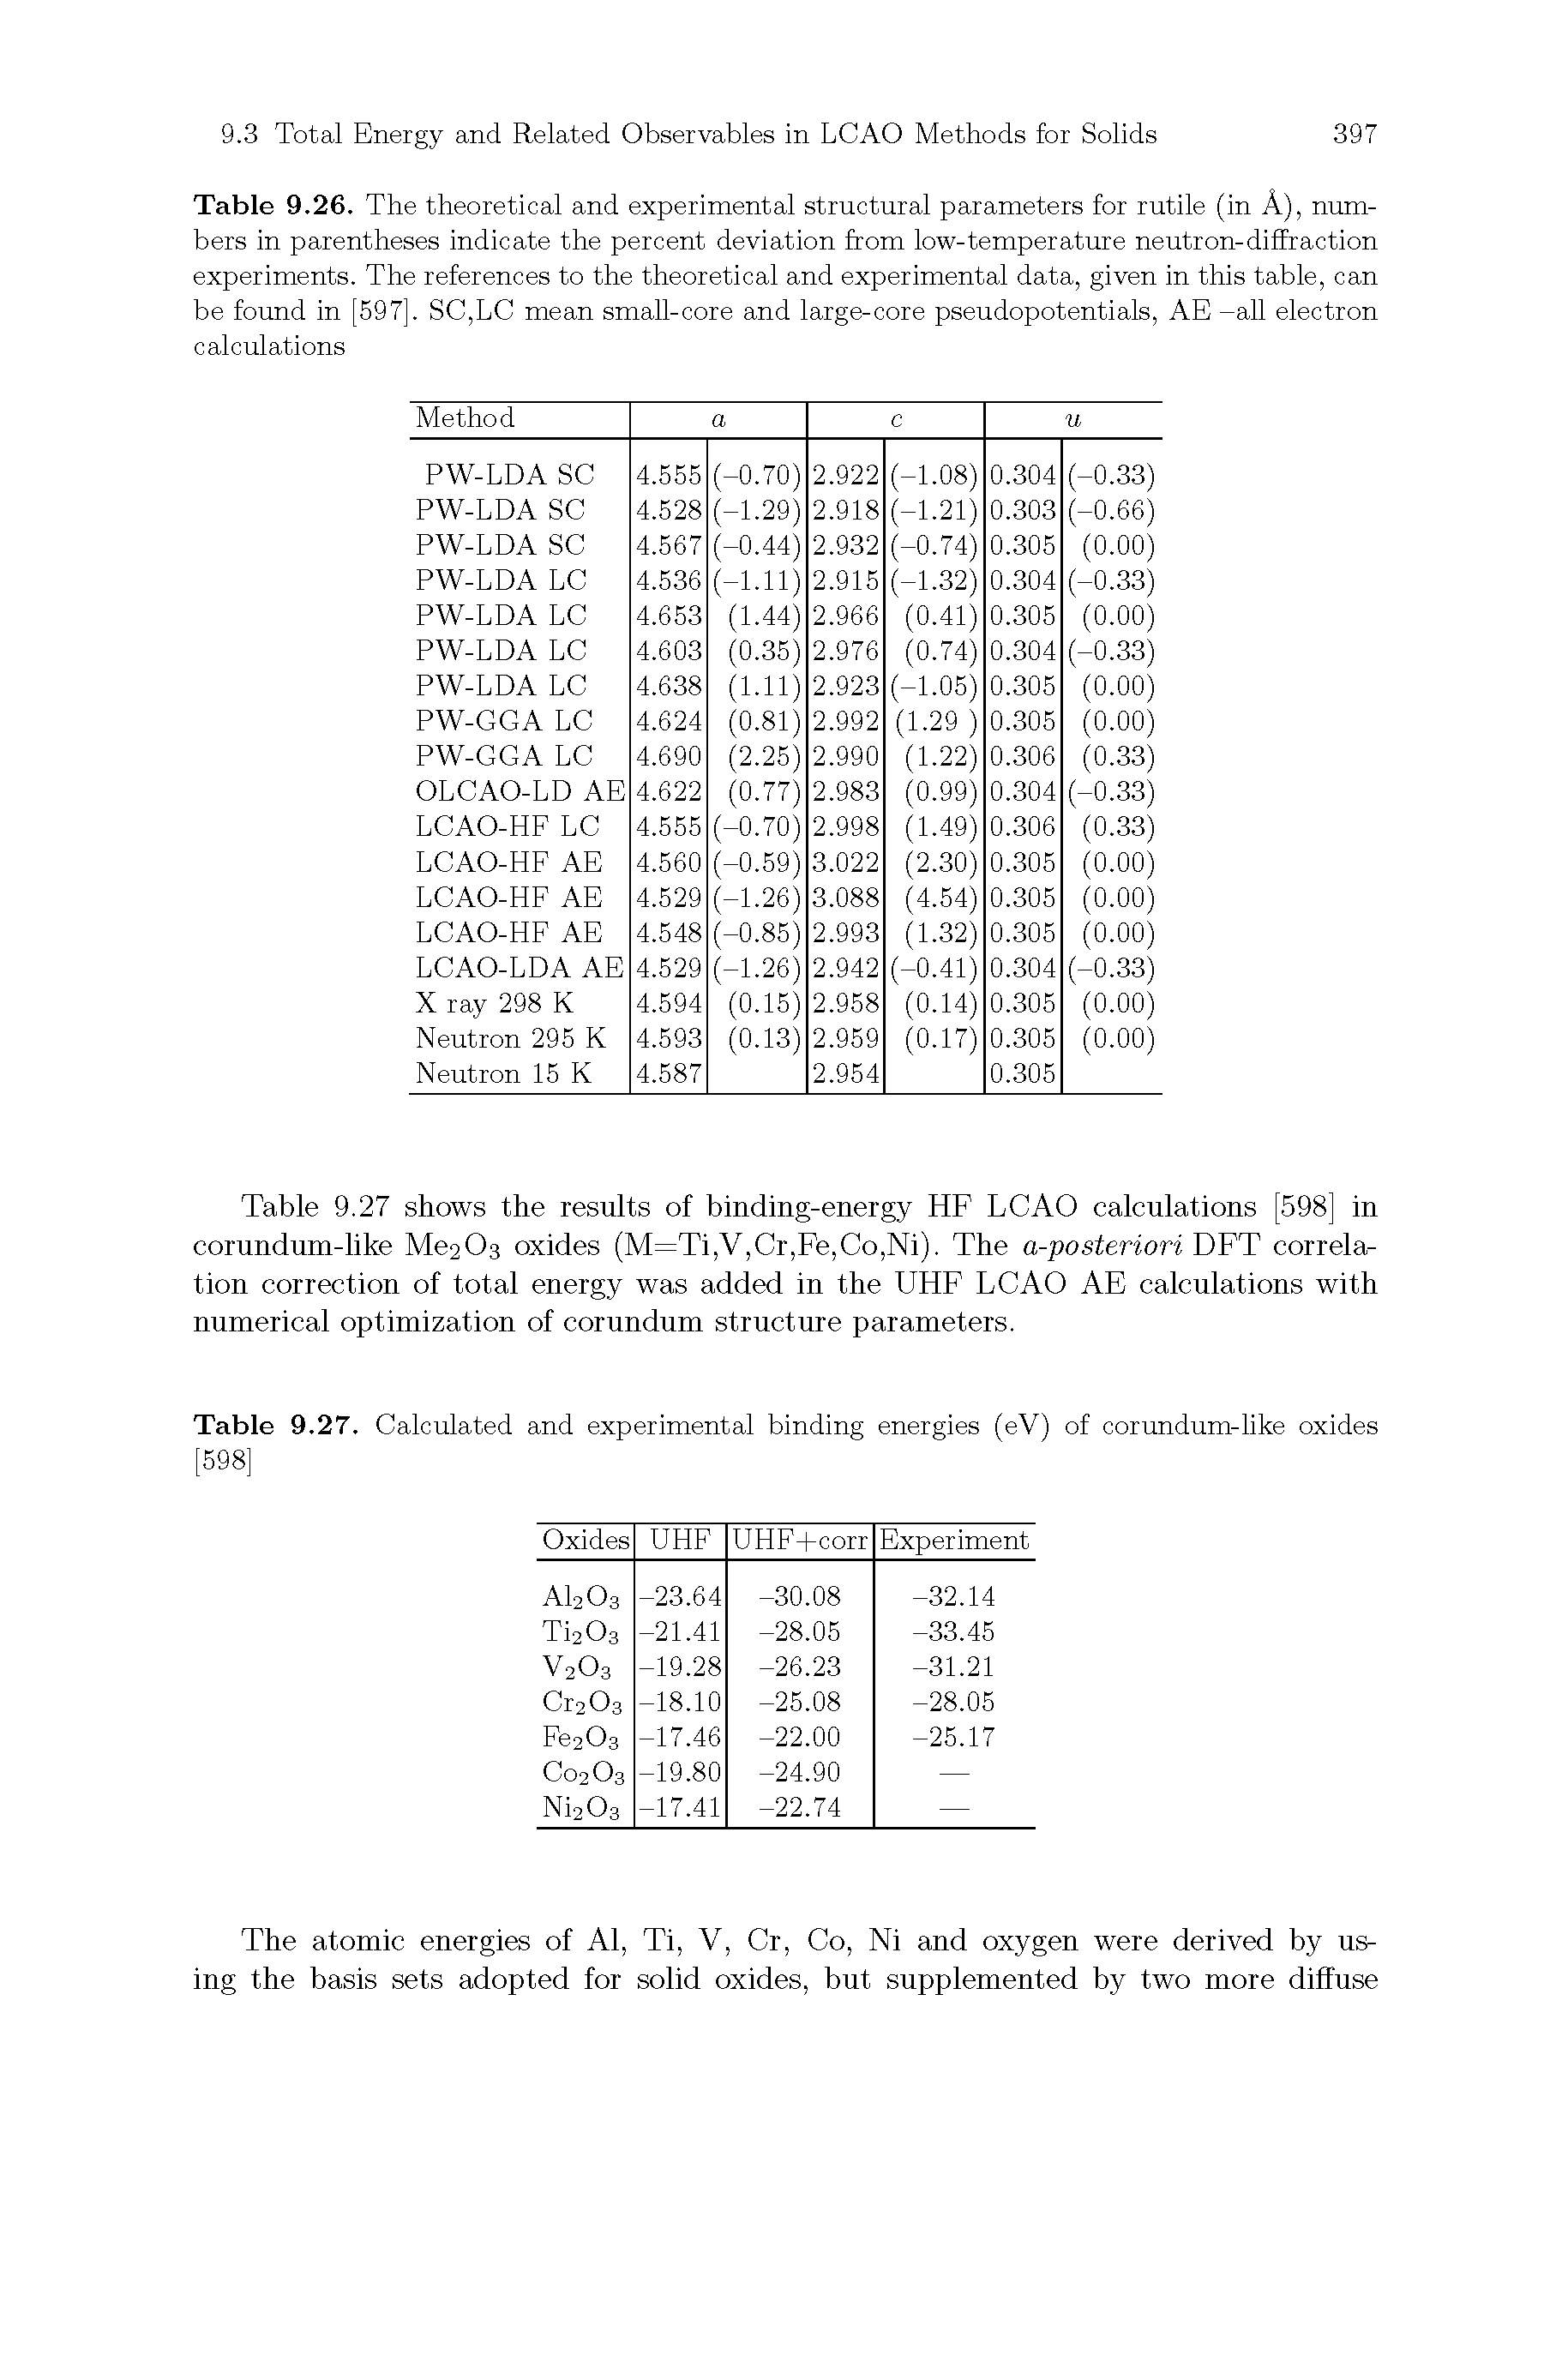 Table 9.26. The theoretical and experimental structural parameters for rutile (in A), numbers in parentheses indicate the percent deviation from low-temperature neutron-diffraction experiments. The references to the theoretical and experimental data, given in this table, can be found in [597]. SC,LC mean small-core and large-core pseudopotentials, AE -all electron calculations...